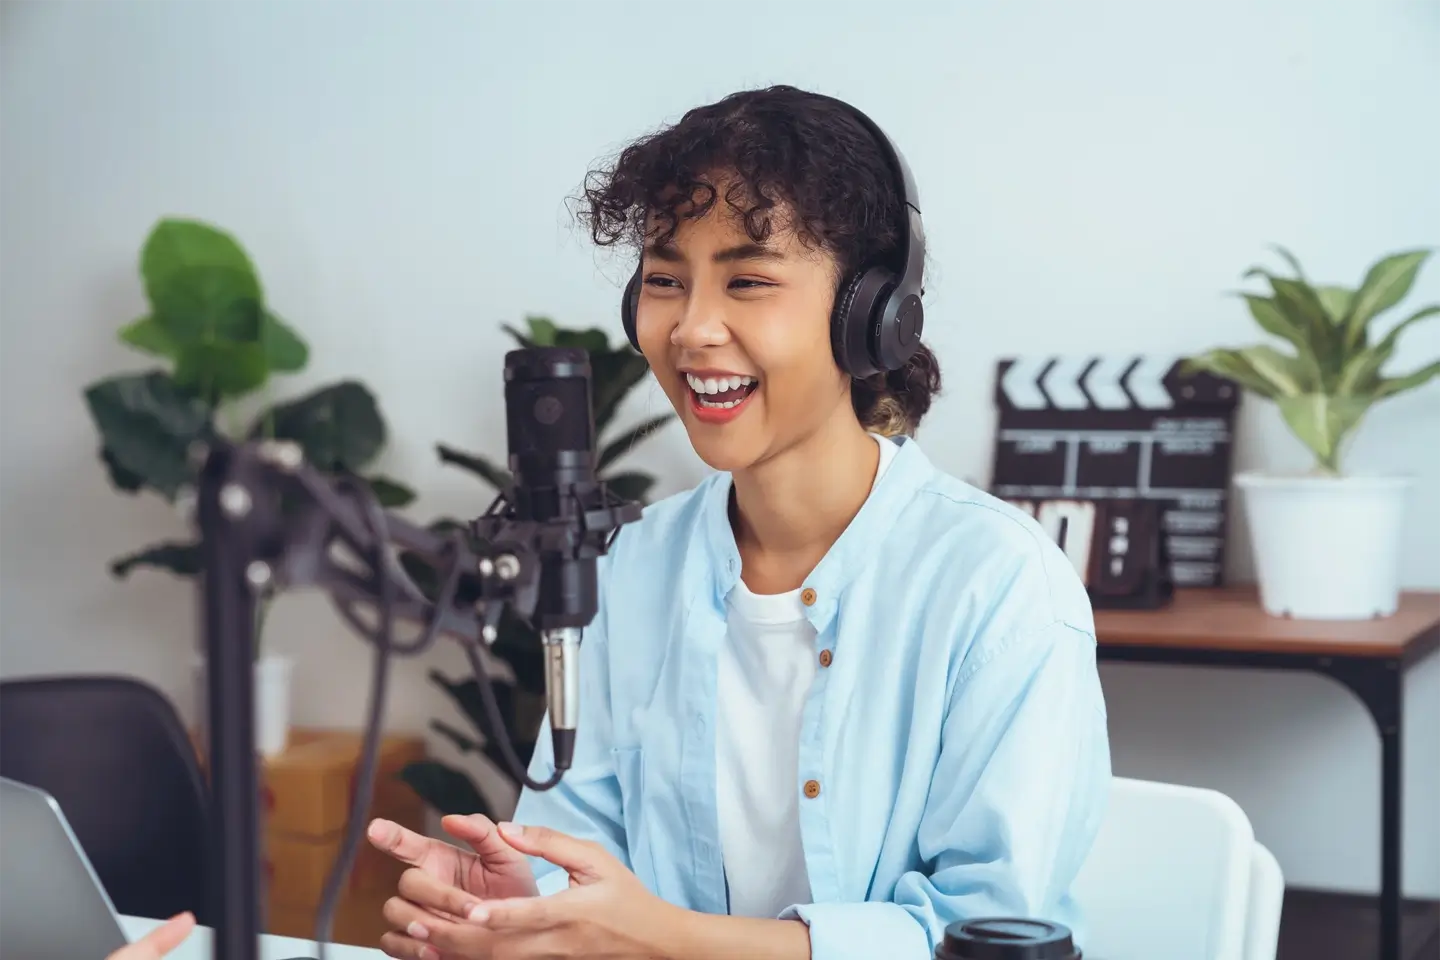 woman use microphones wear headphones with laptop record podcast for radio. Content creator concept.